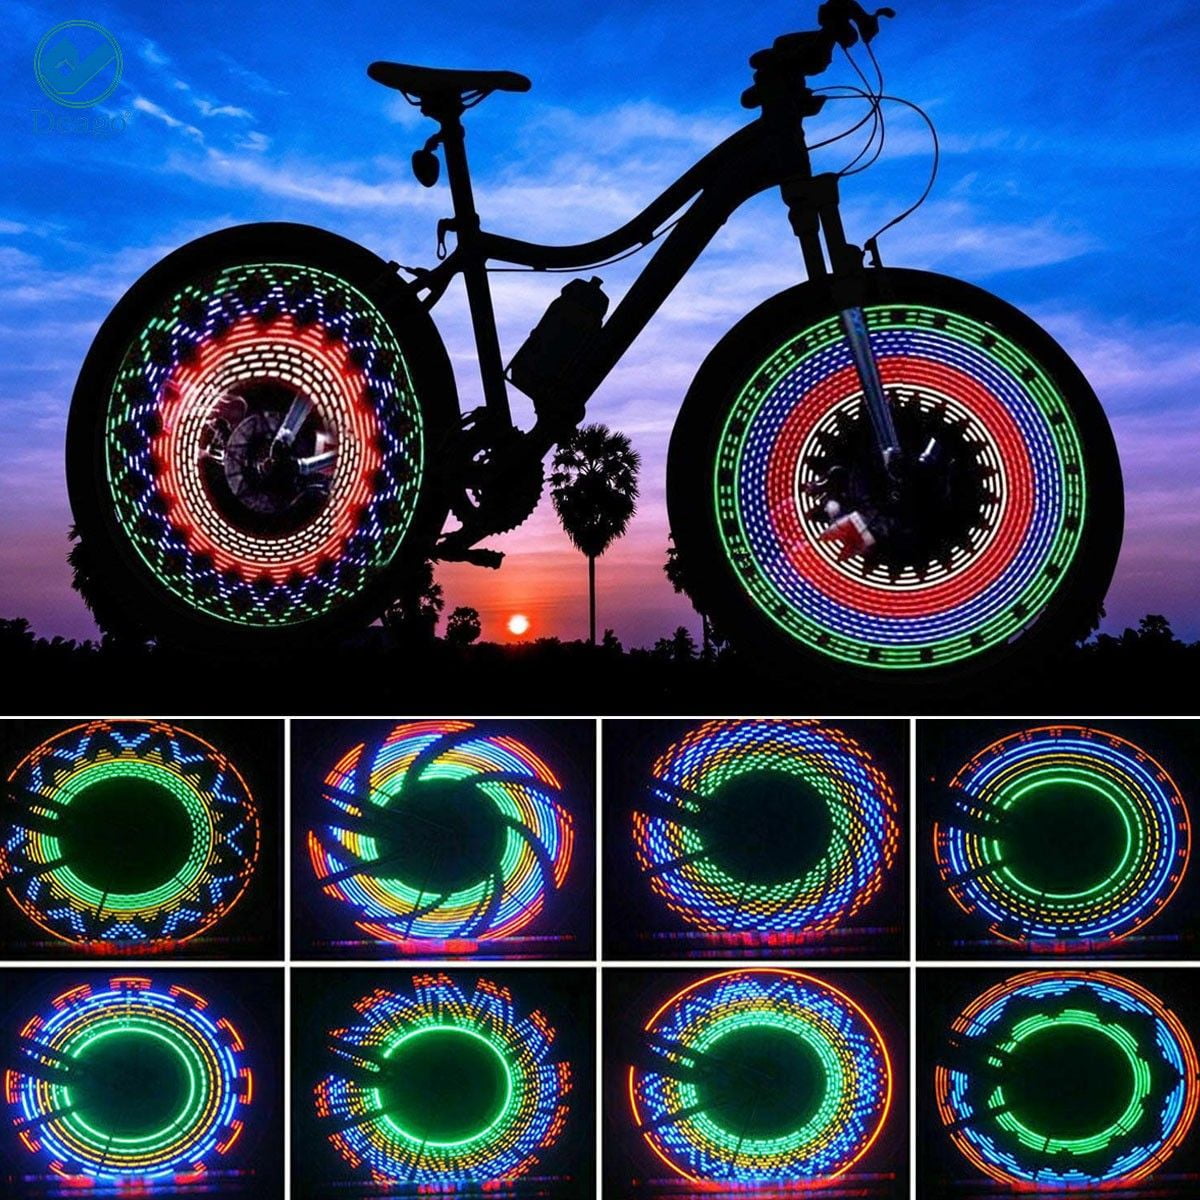 Details about   LED Tire Spoke Light 30 Pattern Colorful Bicycle Wheel Lights Motorcycle Cycling 